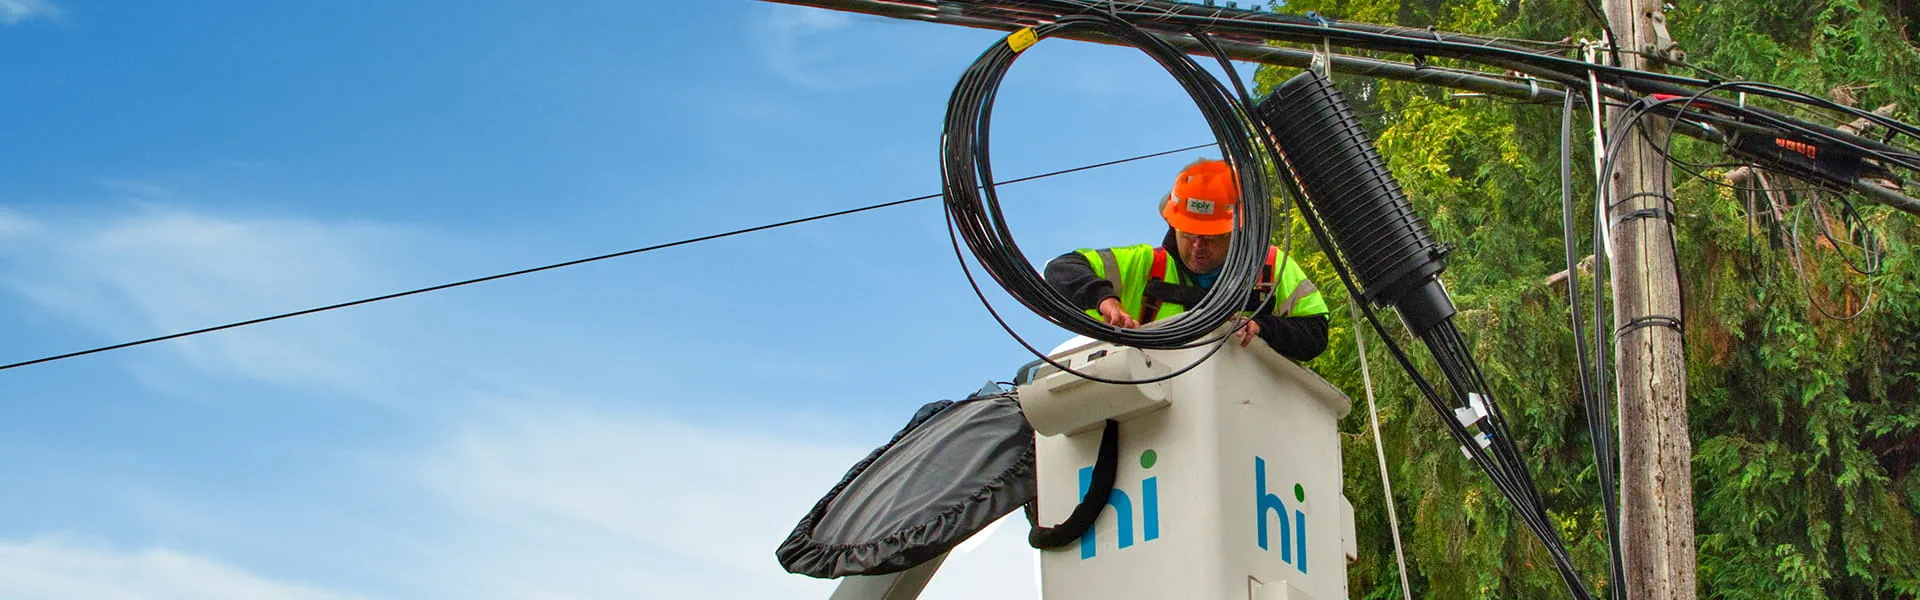 fiber internet is being installed by a worker